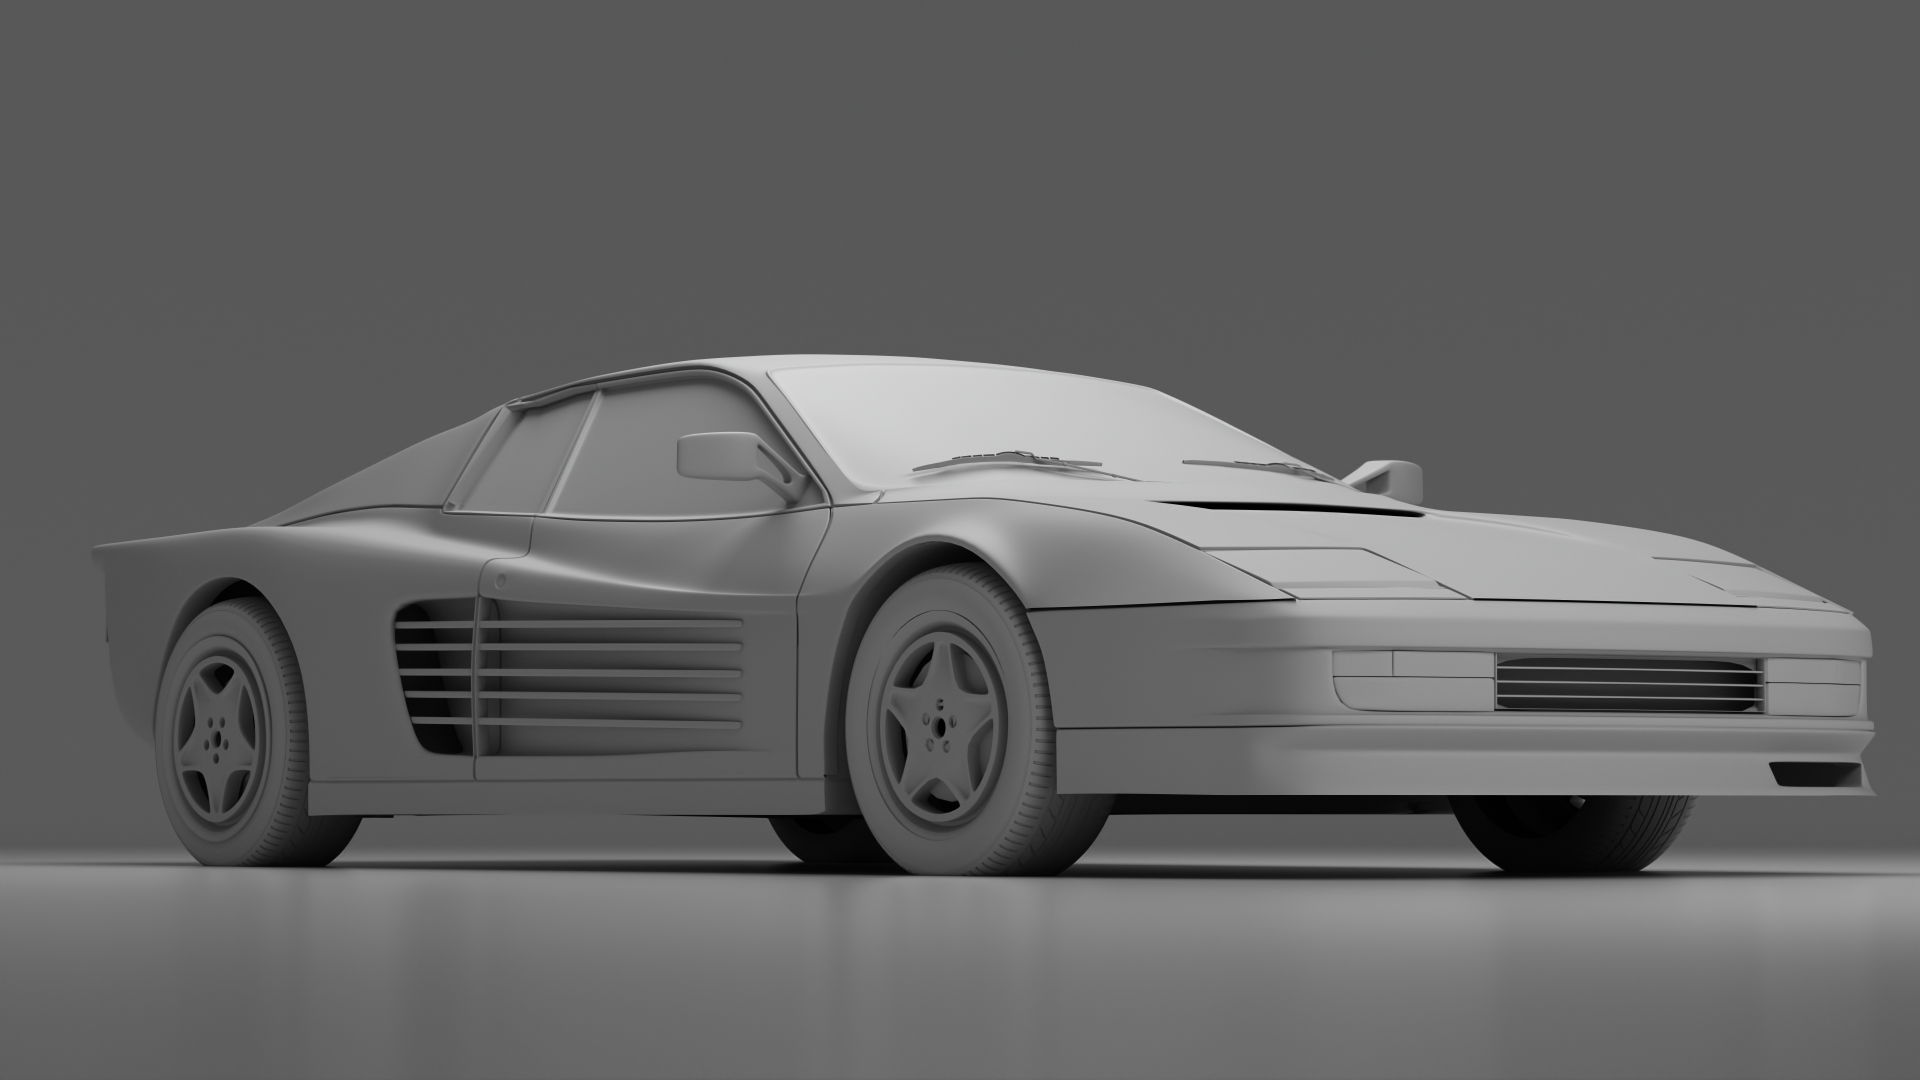 A realistic 3D model of a Ferrari Testarossa by Harry Hughes presented from a low angle using studio lighting.